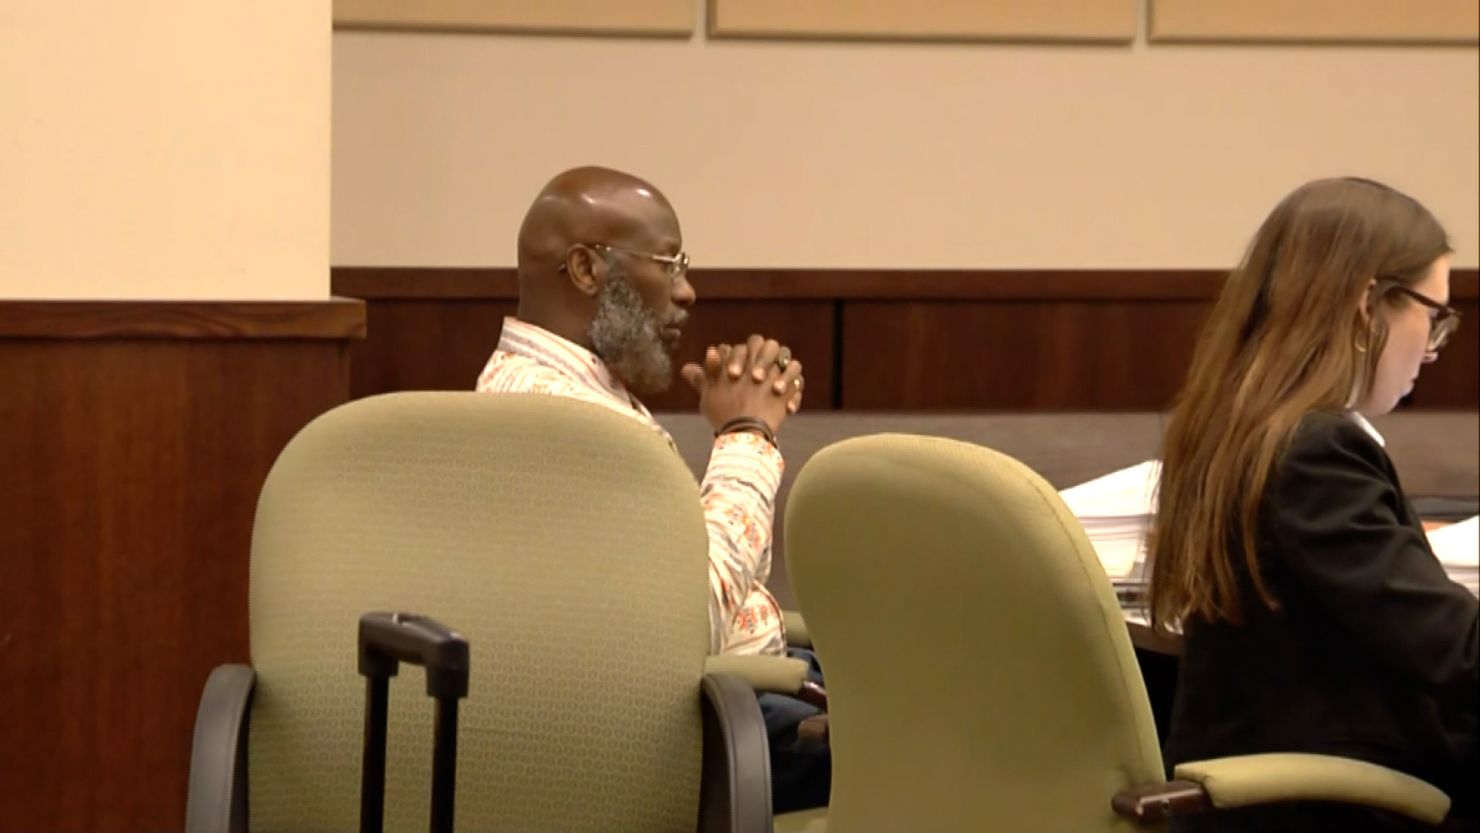 Calvin Riley was sentenced to 10 days in the Leon County Jail.